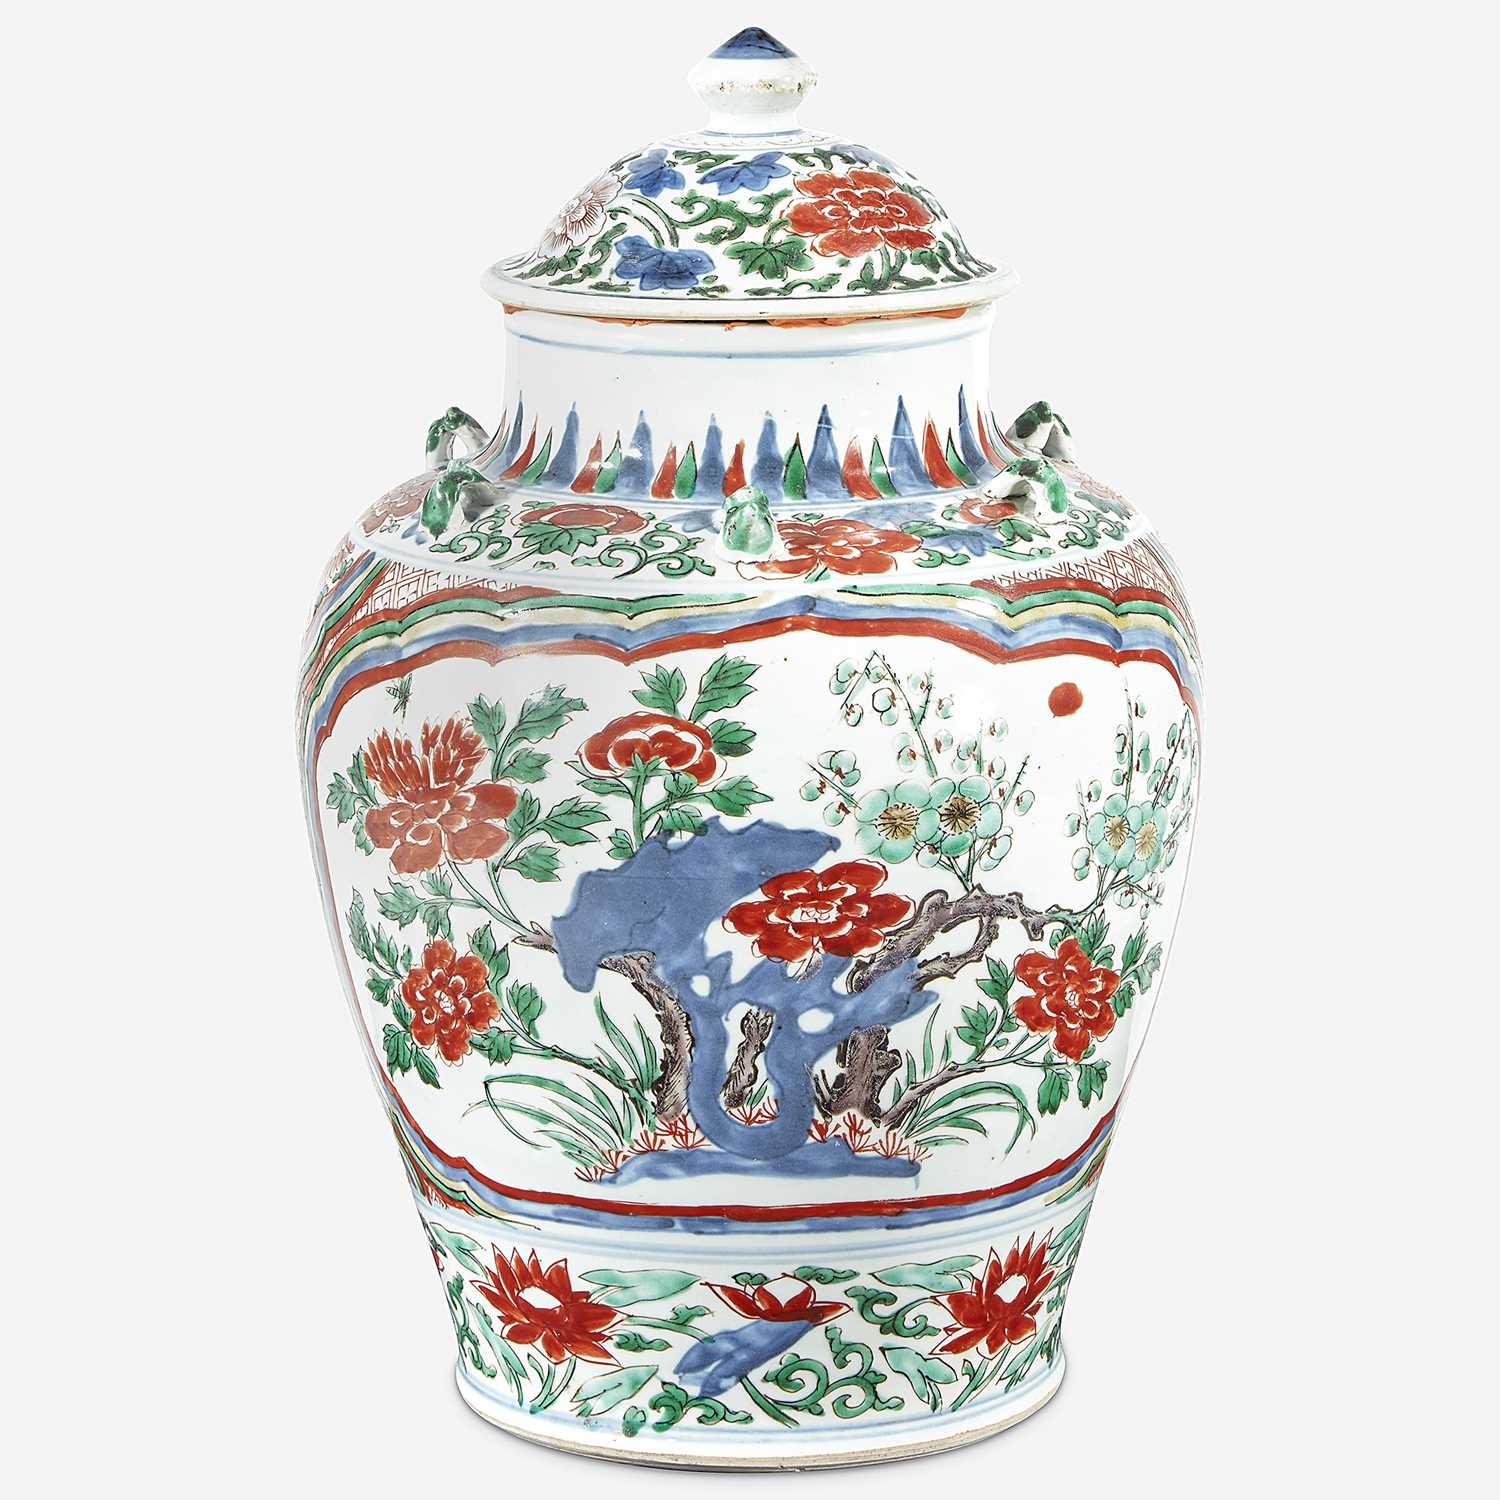 Lot 77 - A Chinese wucai-decorated porcelain jar and cover